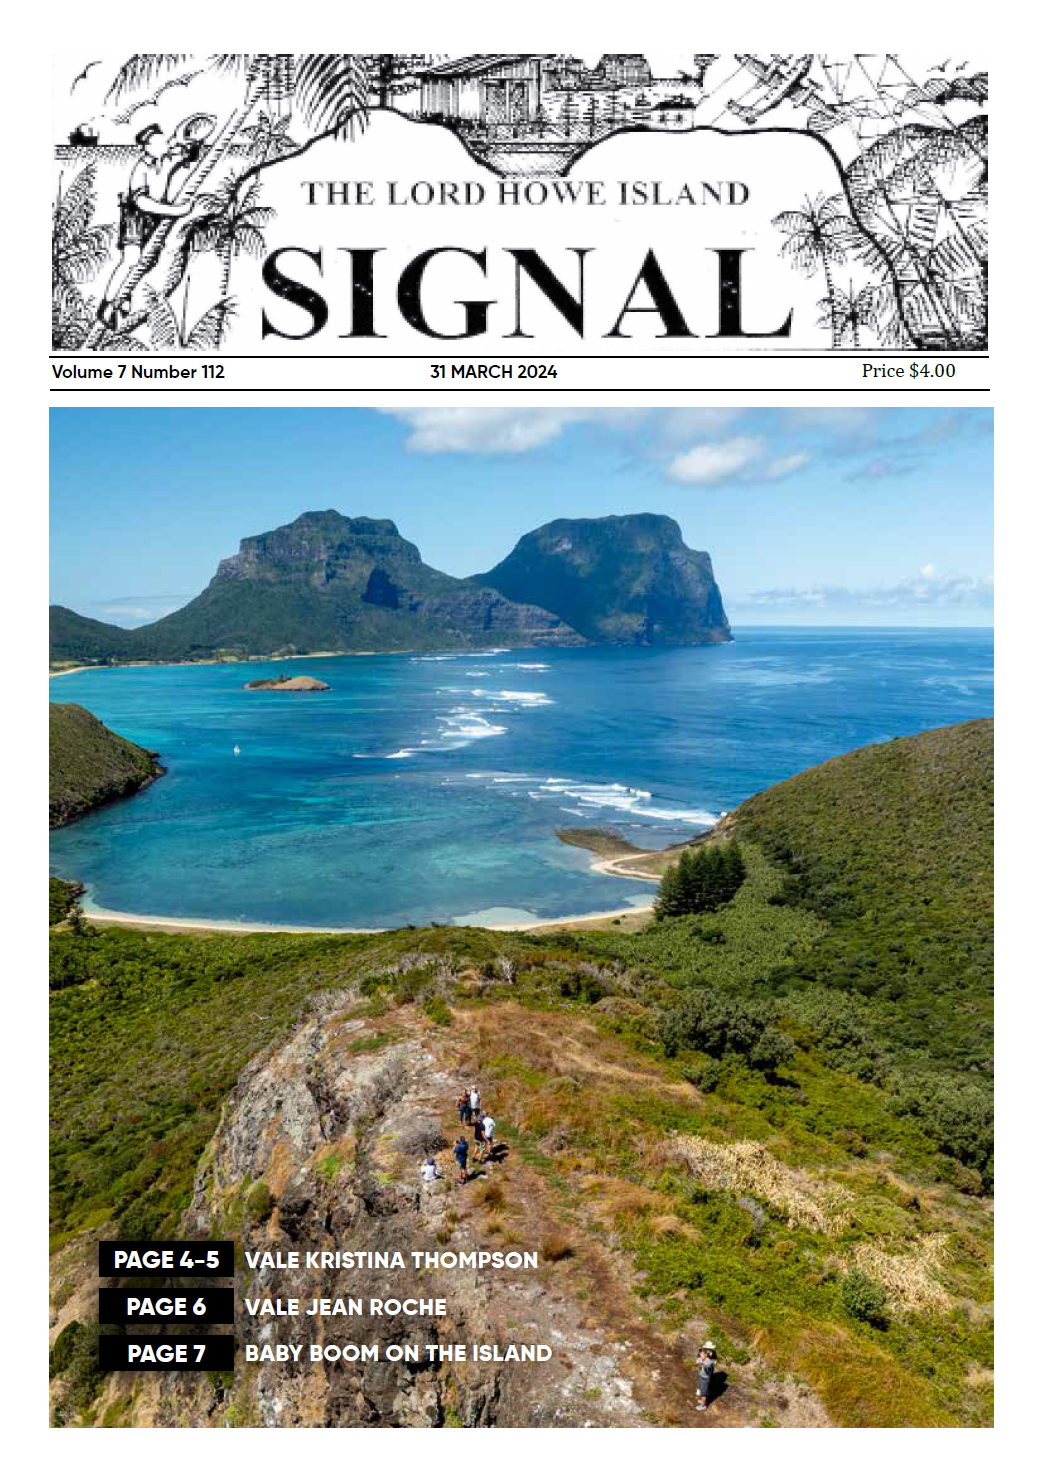 The Lord Howe Island Signal 31 March 2024